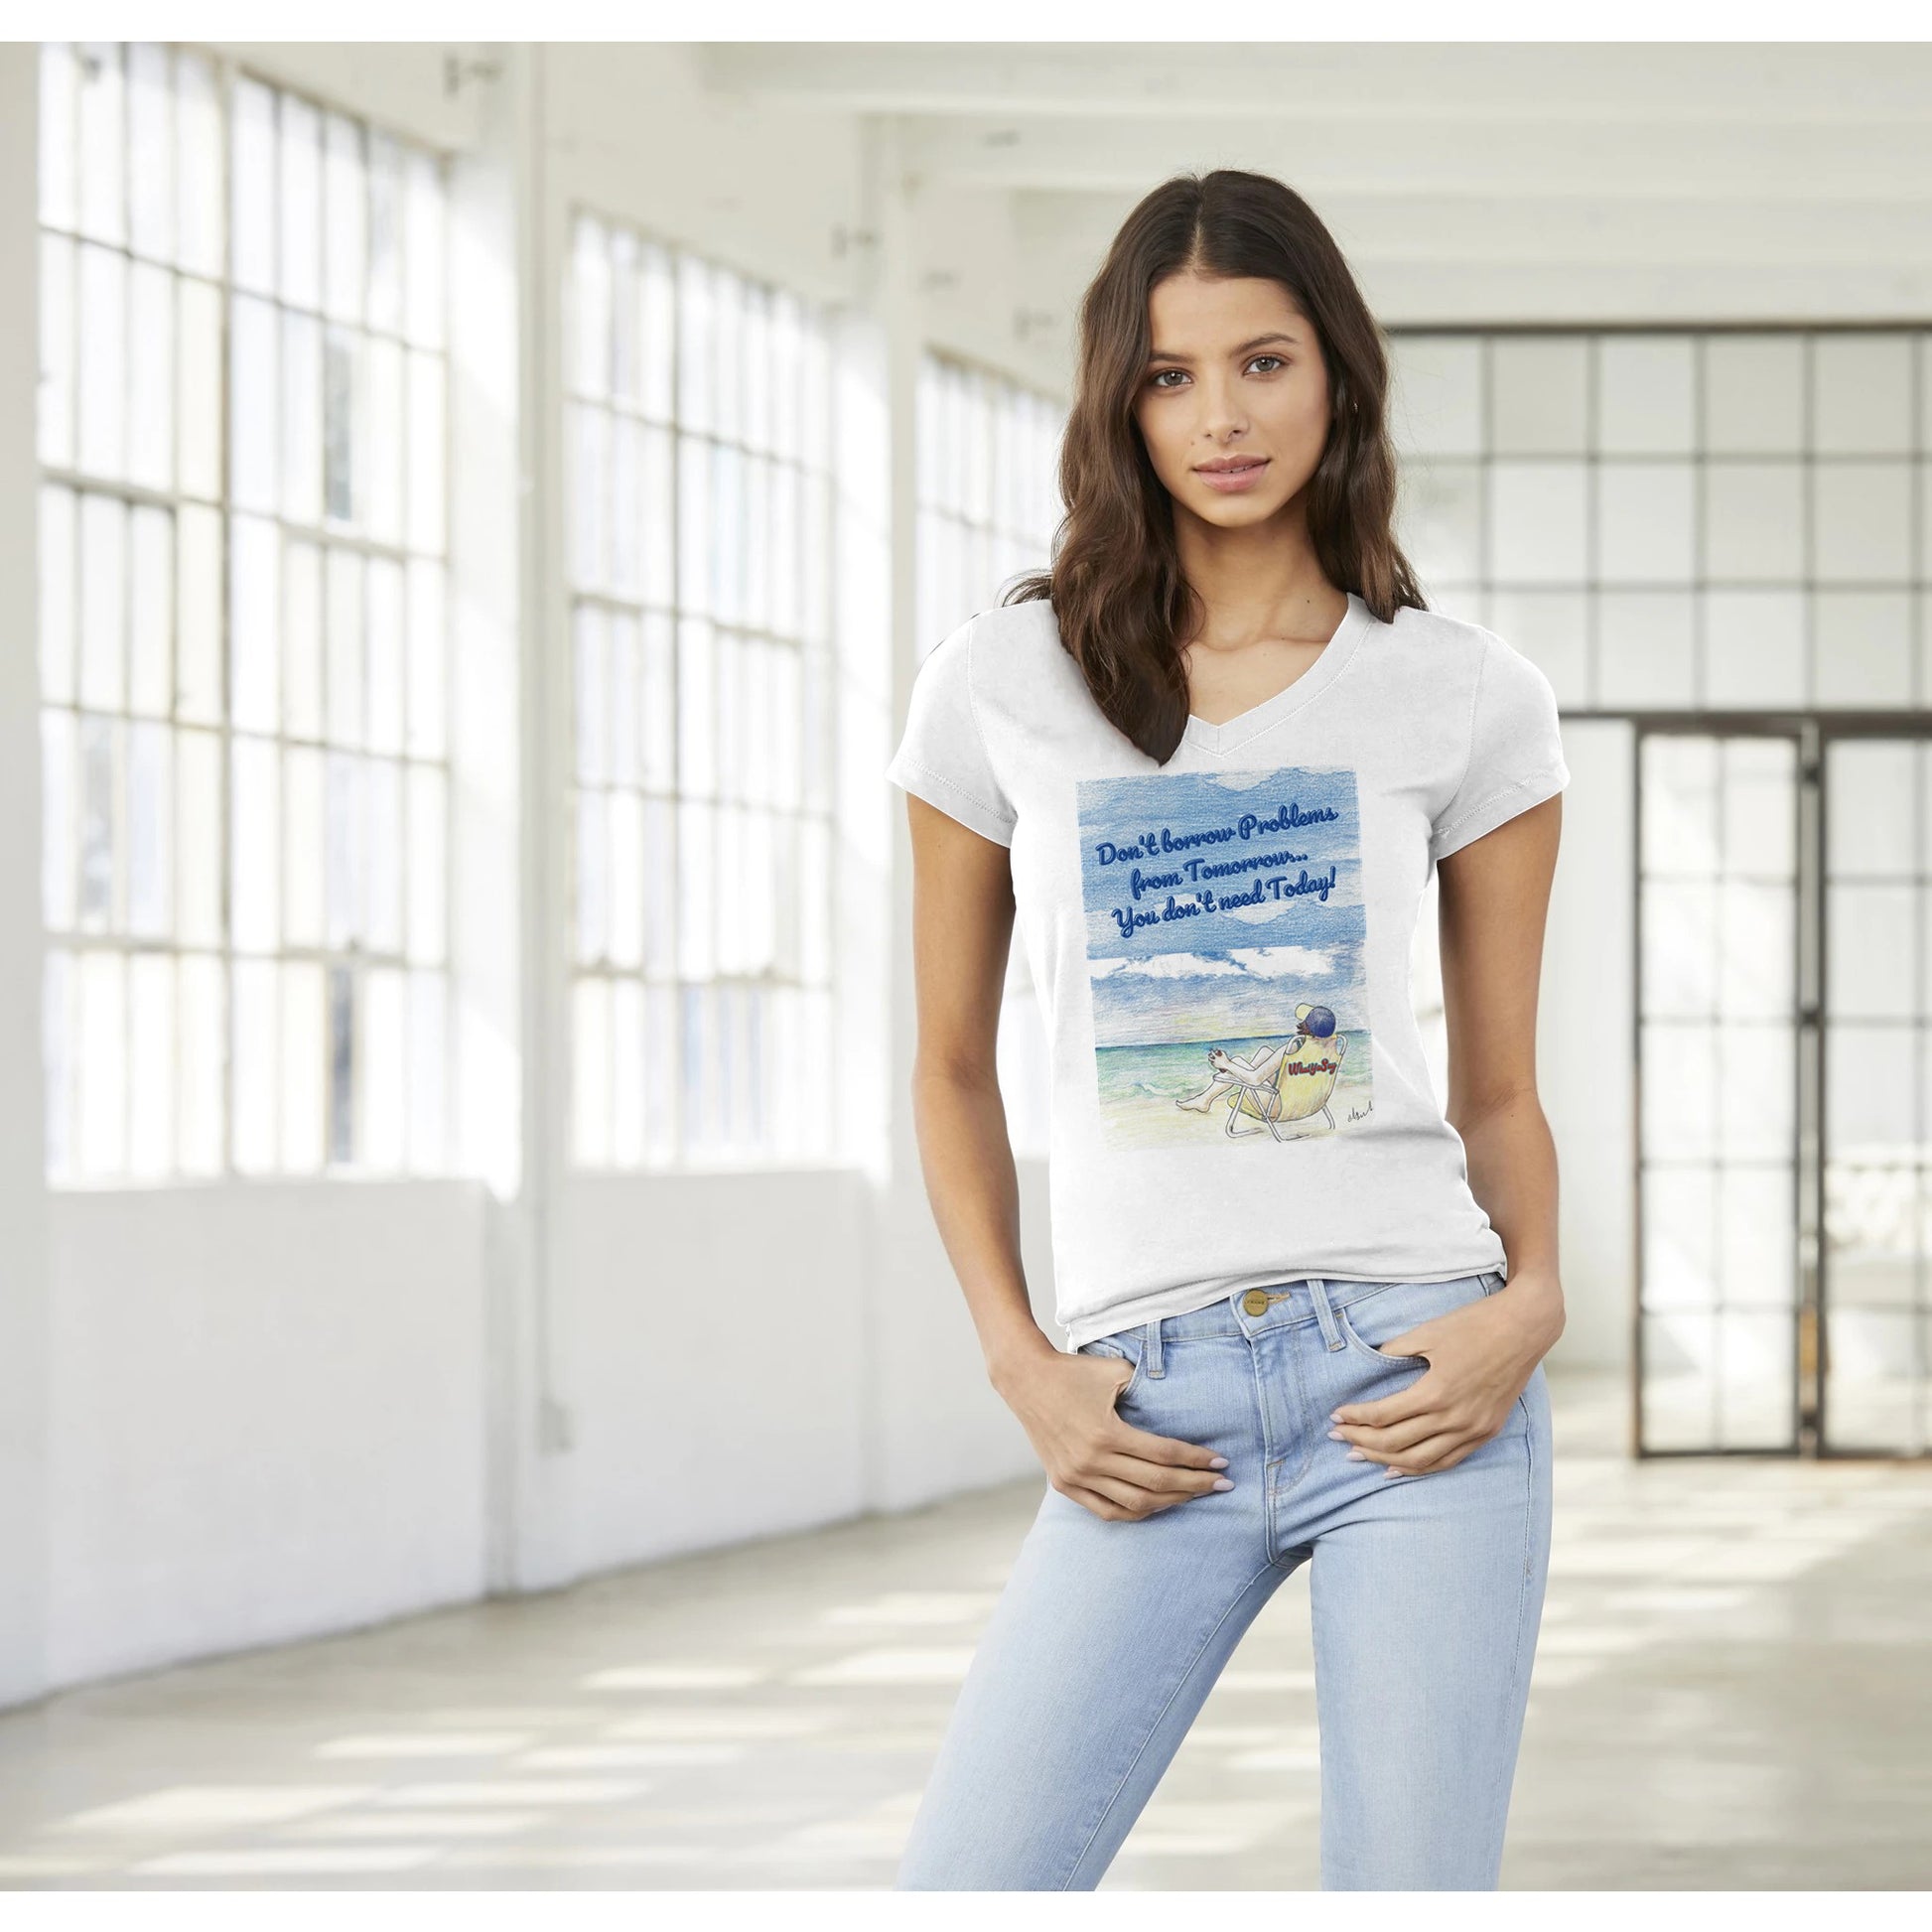 A premium women’s V-neck t-shirt from combed and ring-spun cotton original logo Don’t borrow Problems from Tomorrow… You don’t need Today! on front worn by a dark-haired female model standing with both thumbs in front pockets.